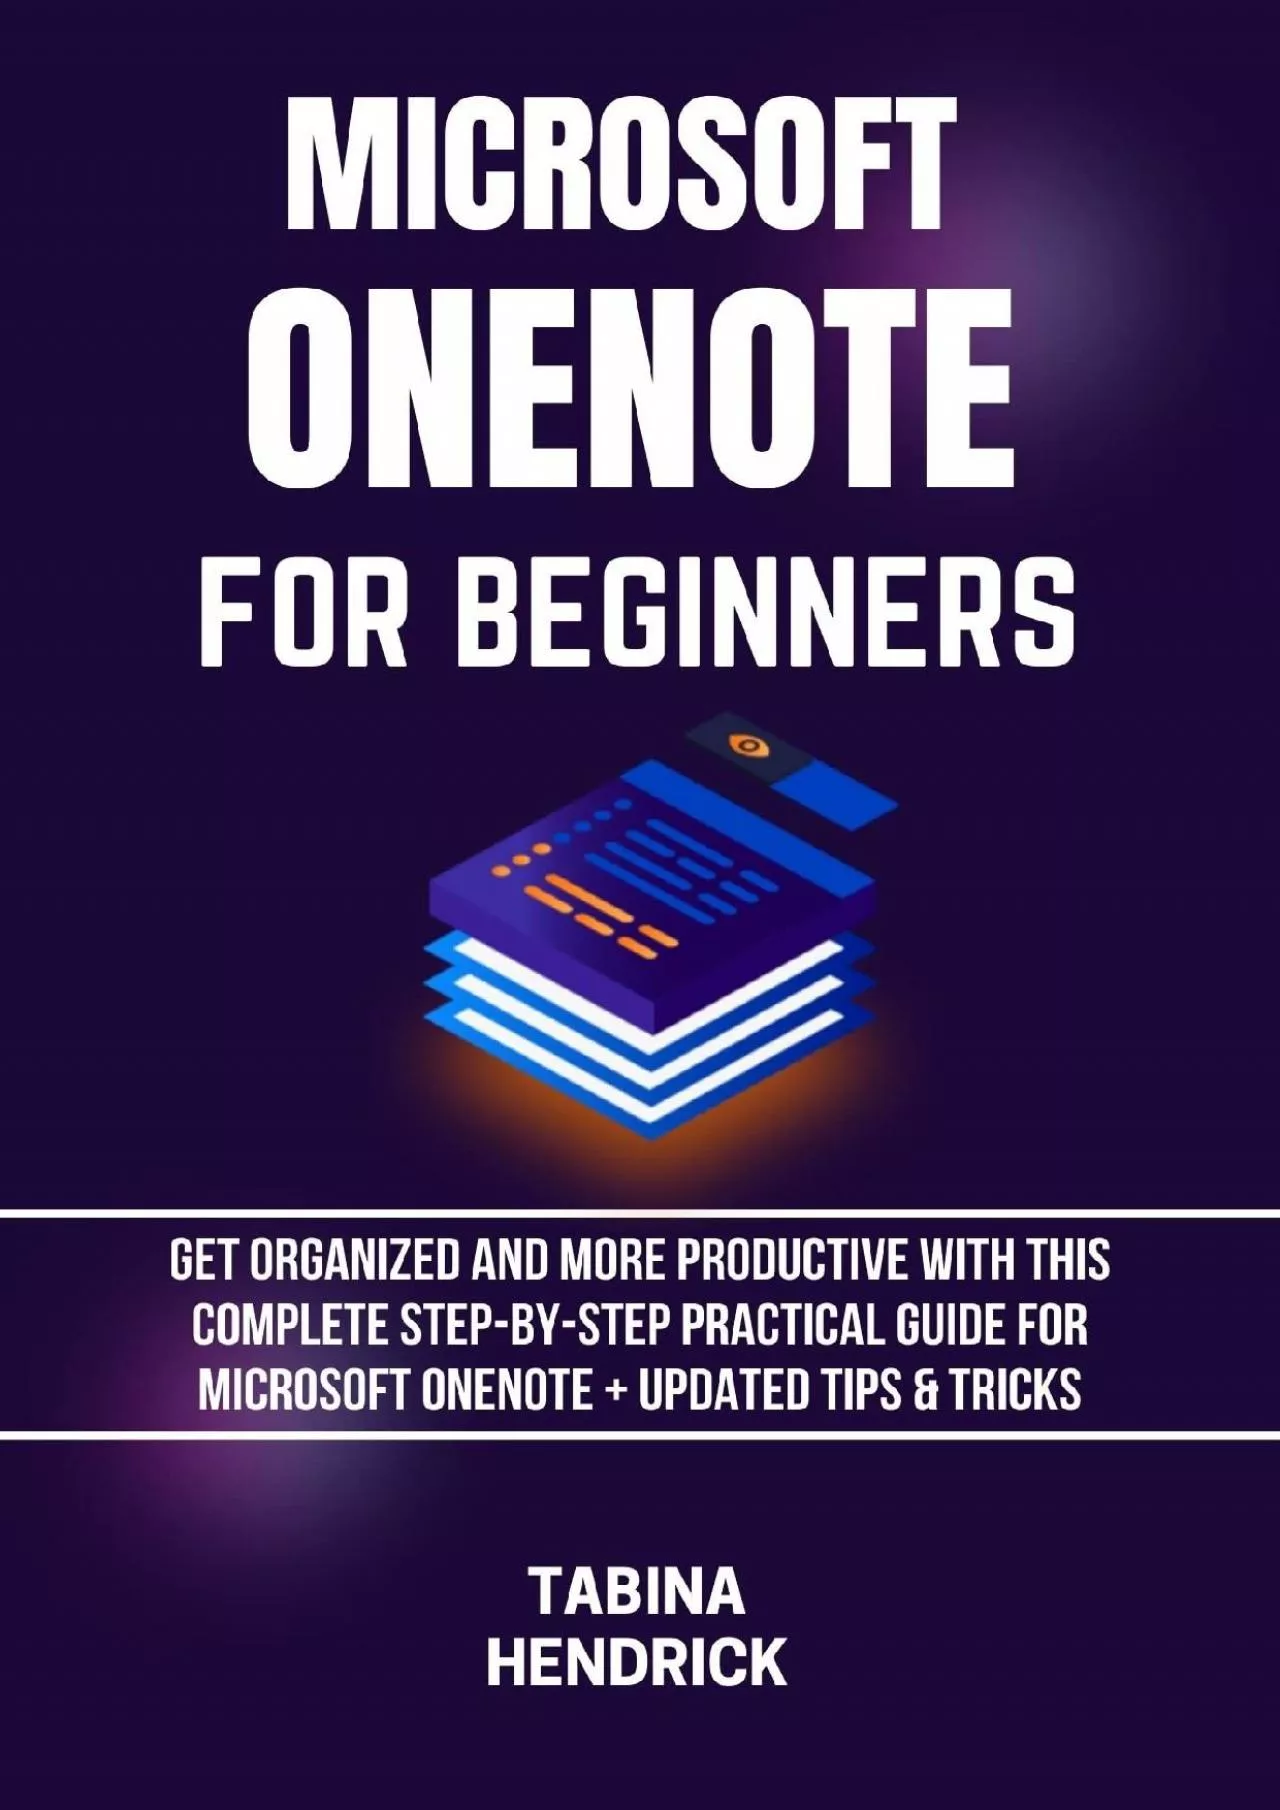 (BOOK)-MICROSOFT ONENOTE FOR BEGINNERS: Get Organized and More Productive with This Complete